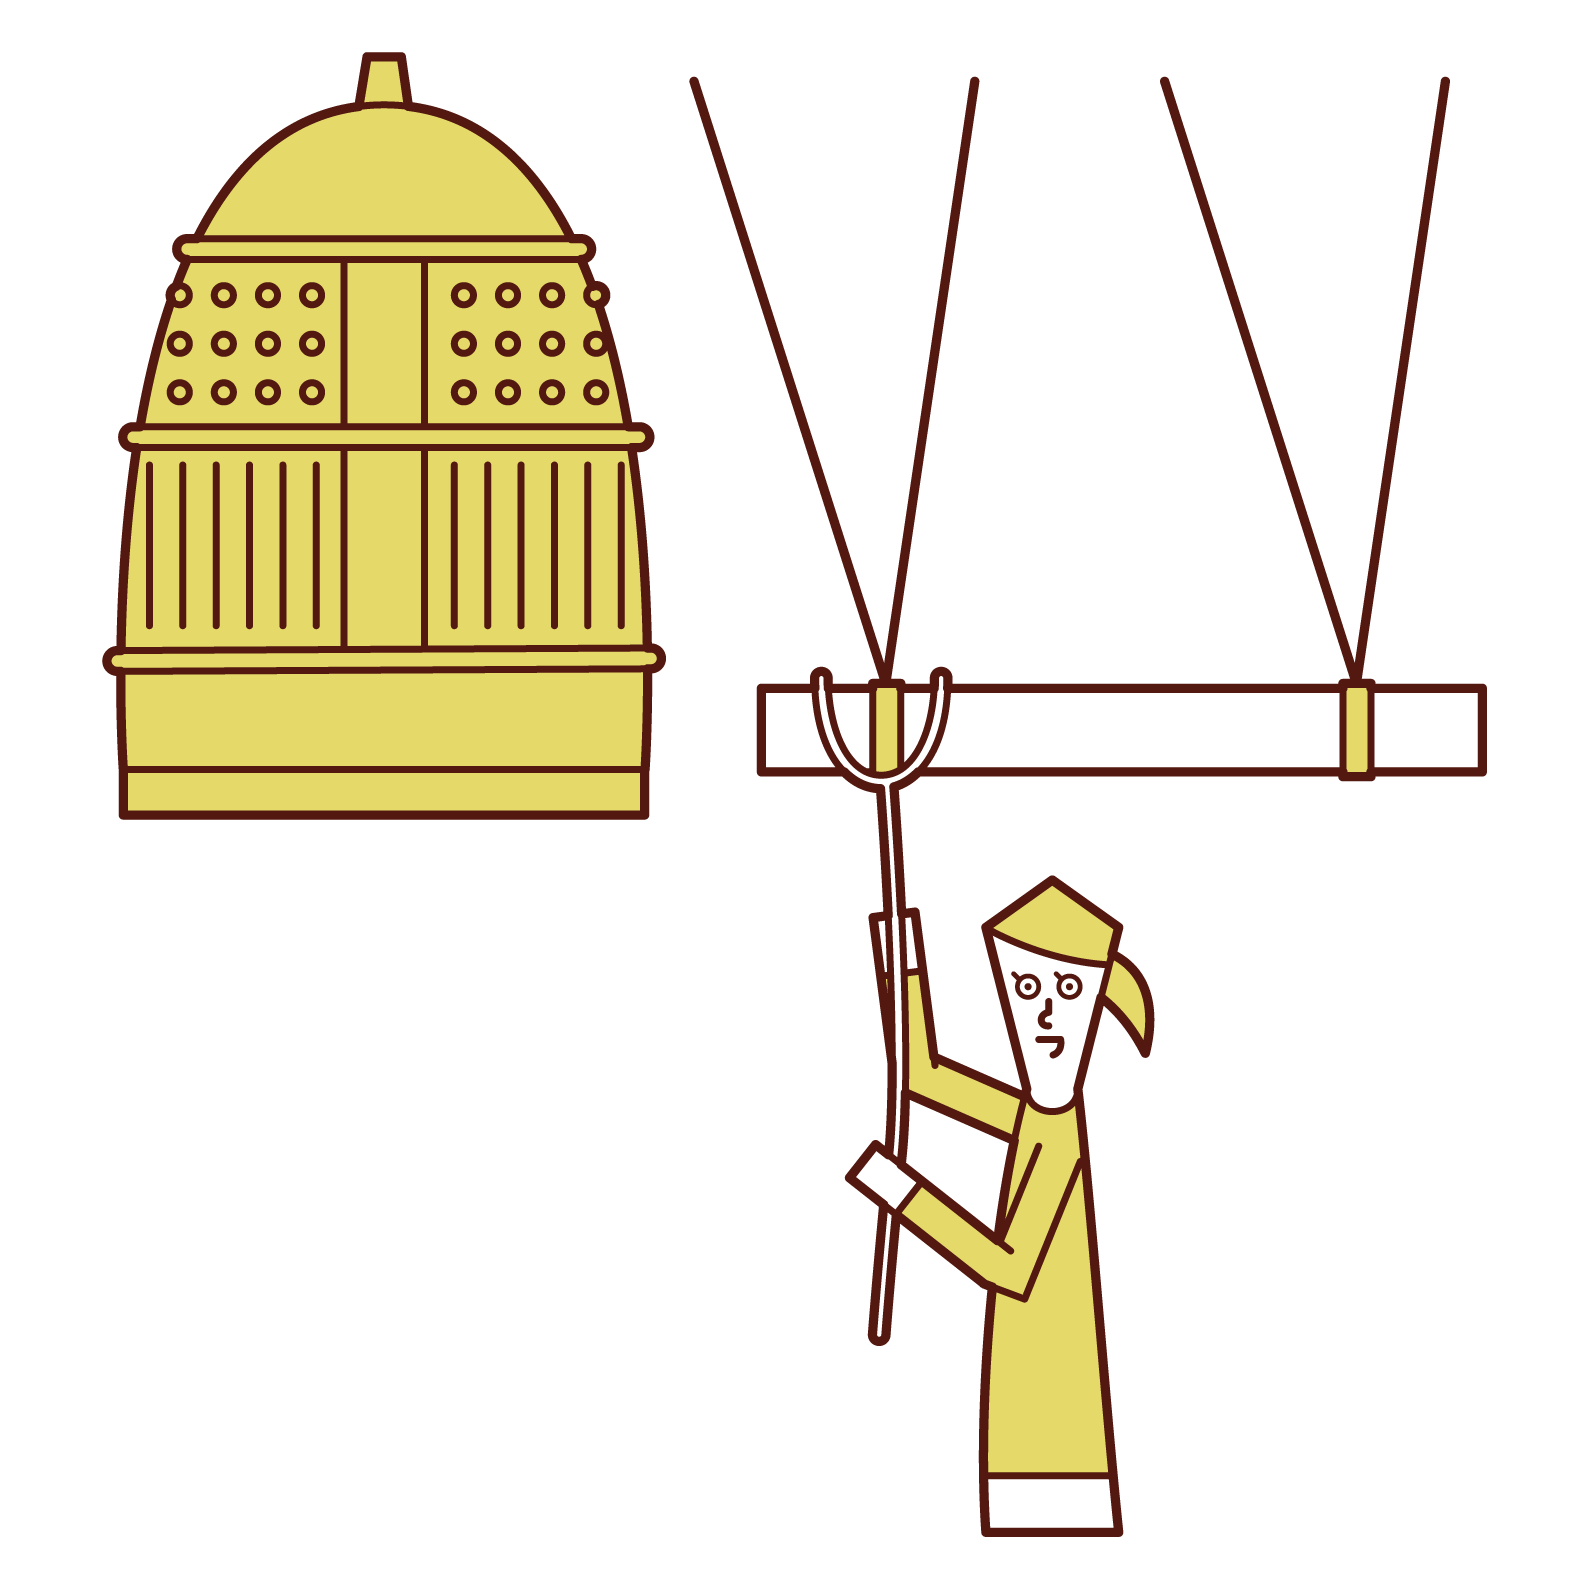 Illustration of a woman ringing a temple bell